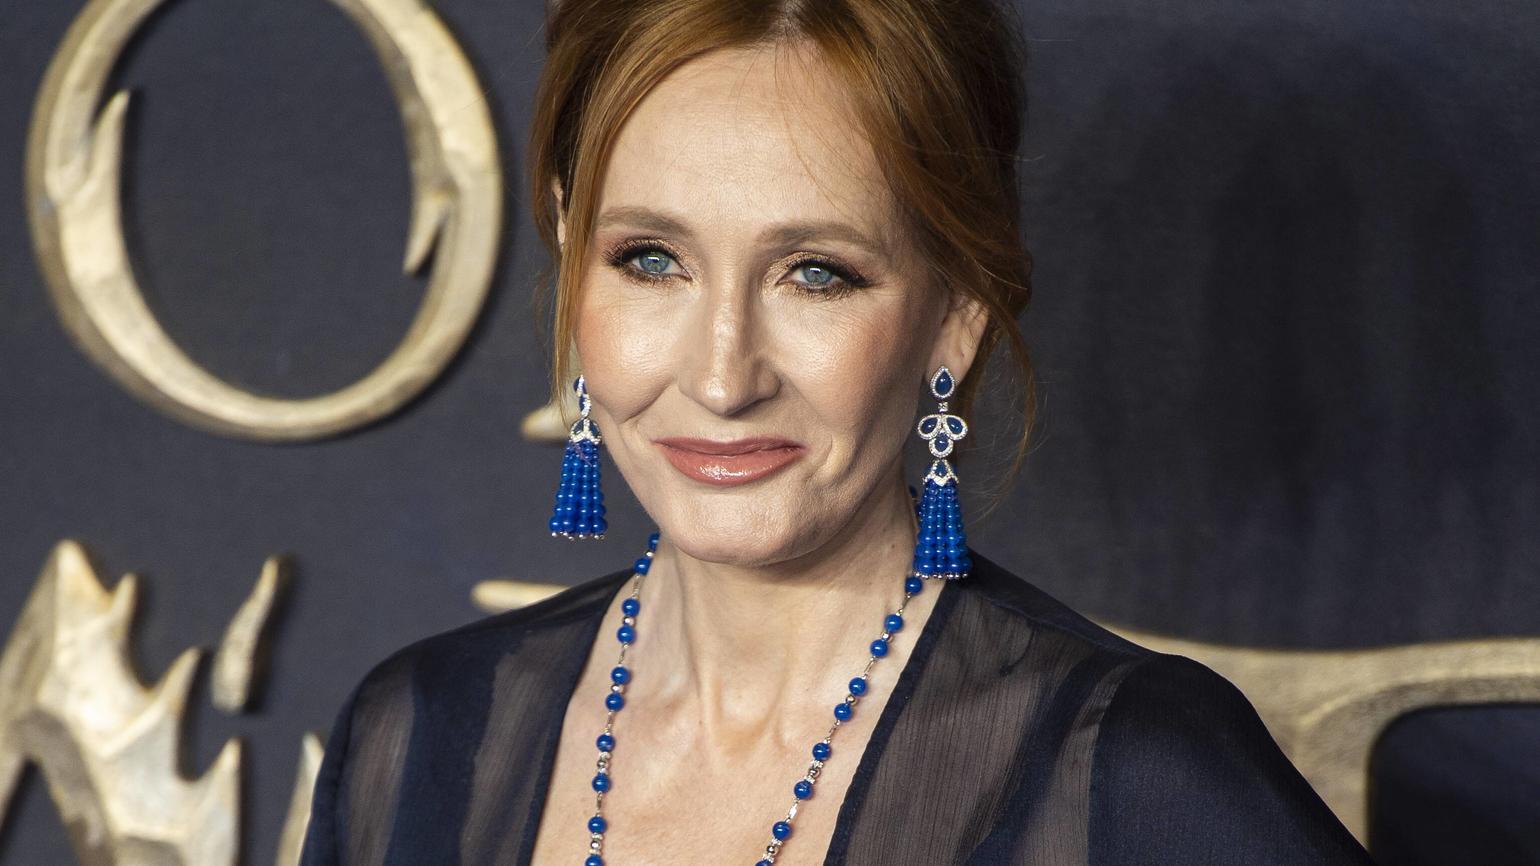 The UK Premiere of Fantastic Beasts: The Crimes Of Grindelwald London, UK. J.K. Rowling at The UK Premiere of Fantastic Beasts: The Crimes Of Grindelwald held at Vue West End, Leicester Square, London on Tuesday 13 November 2018 . LMK386-J2944-141118